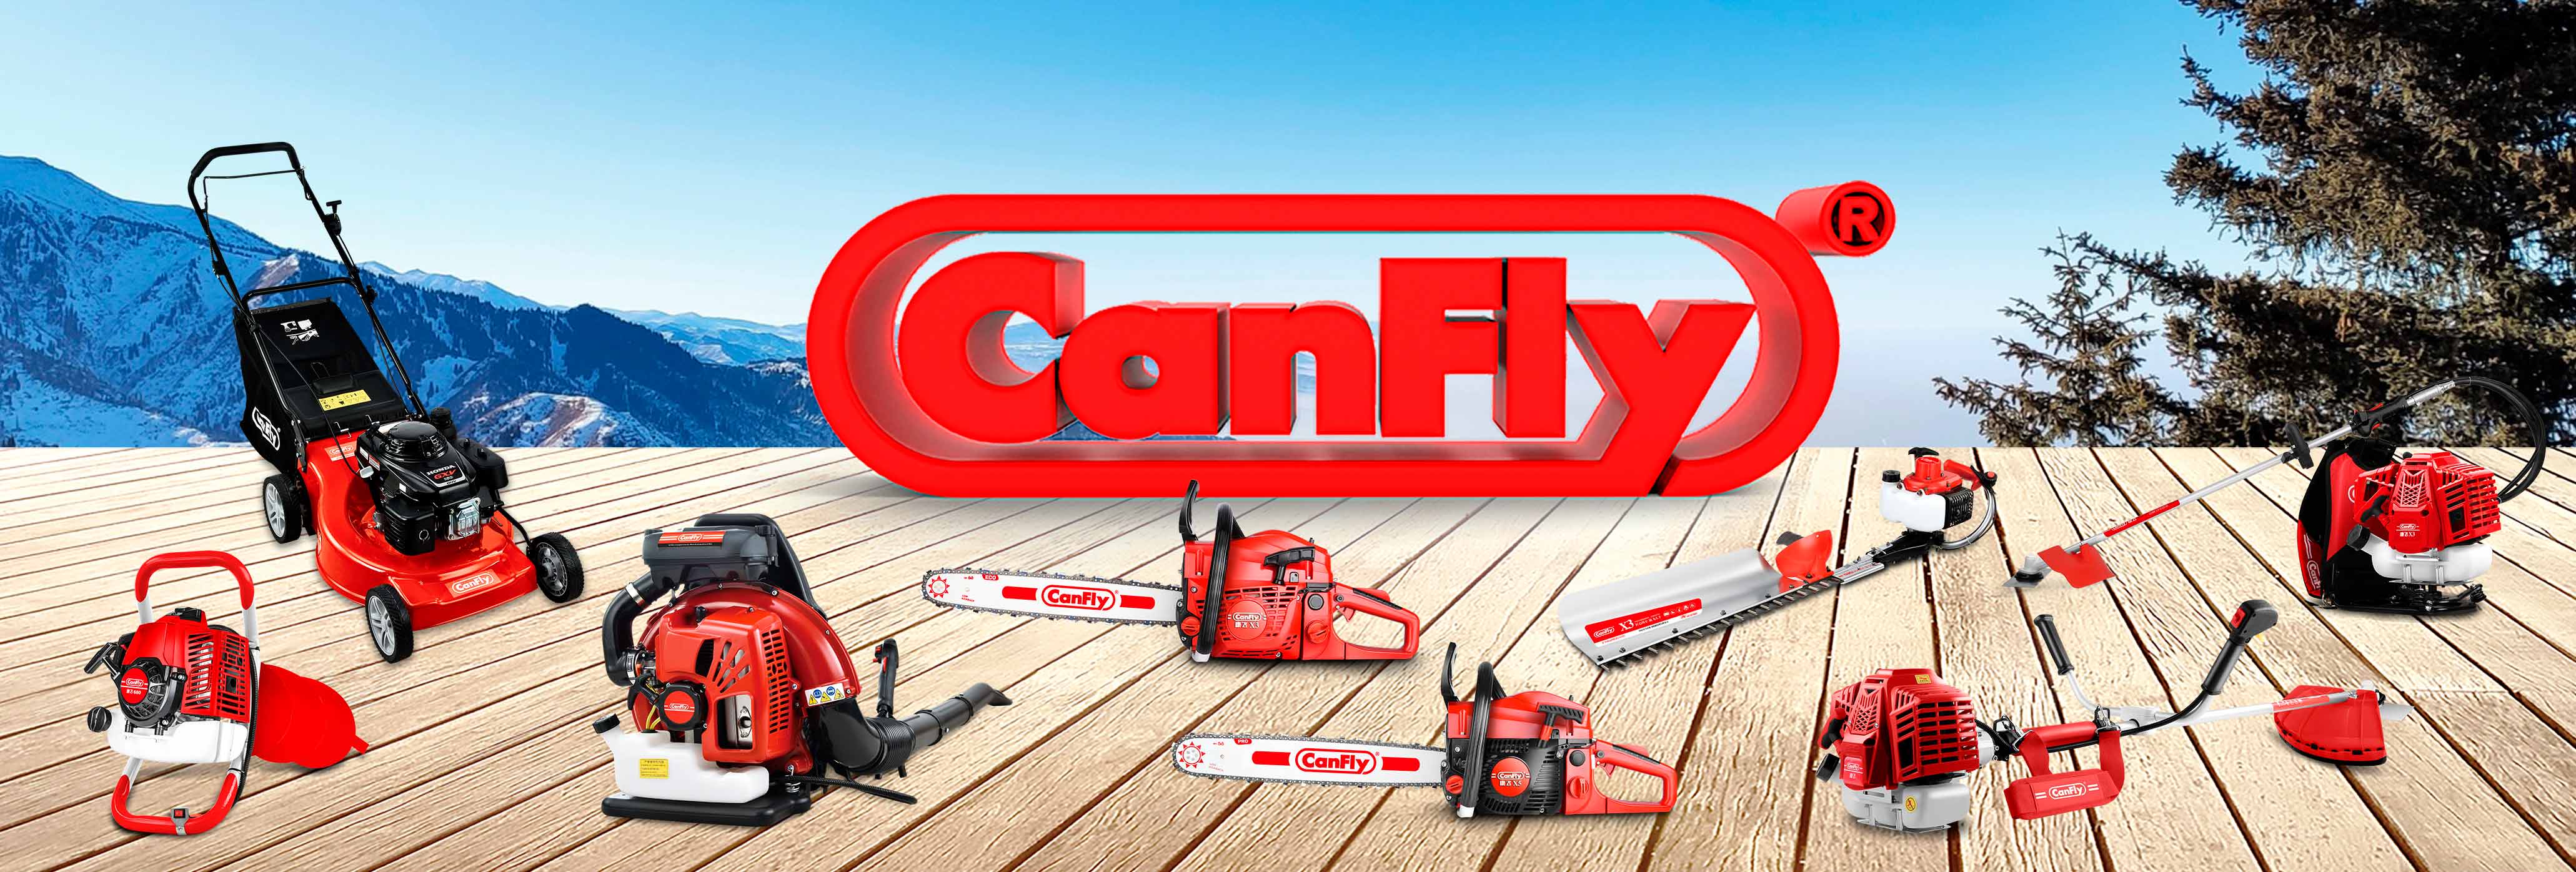 Canfly chainsaw